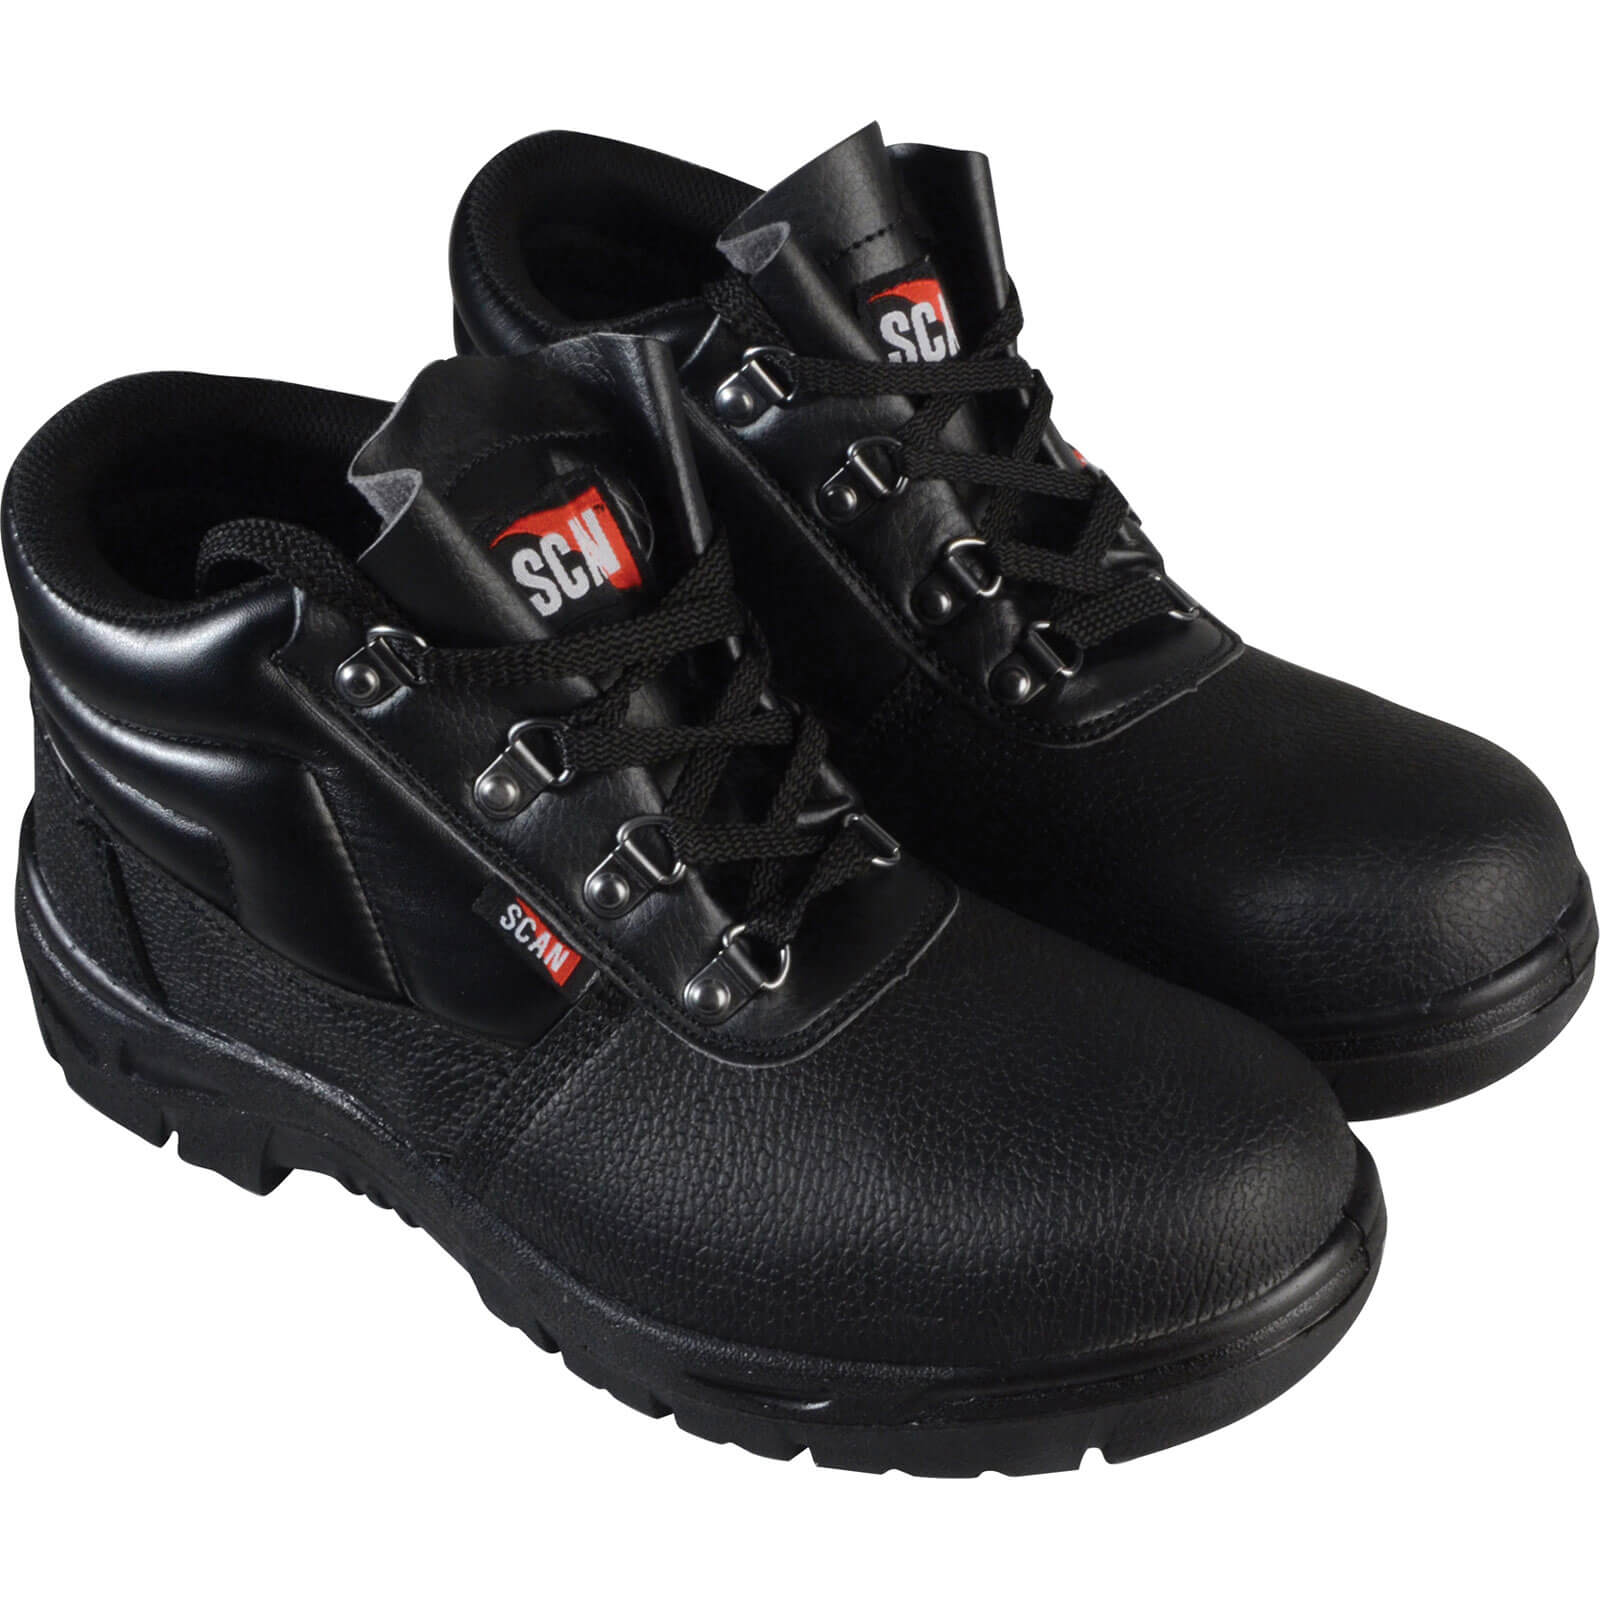 Photos - Safety Equipment SCAN Mens Dual Density Chukka Safety Boots Black Size 7 FWCHUK7 